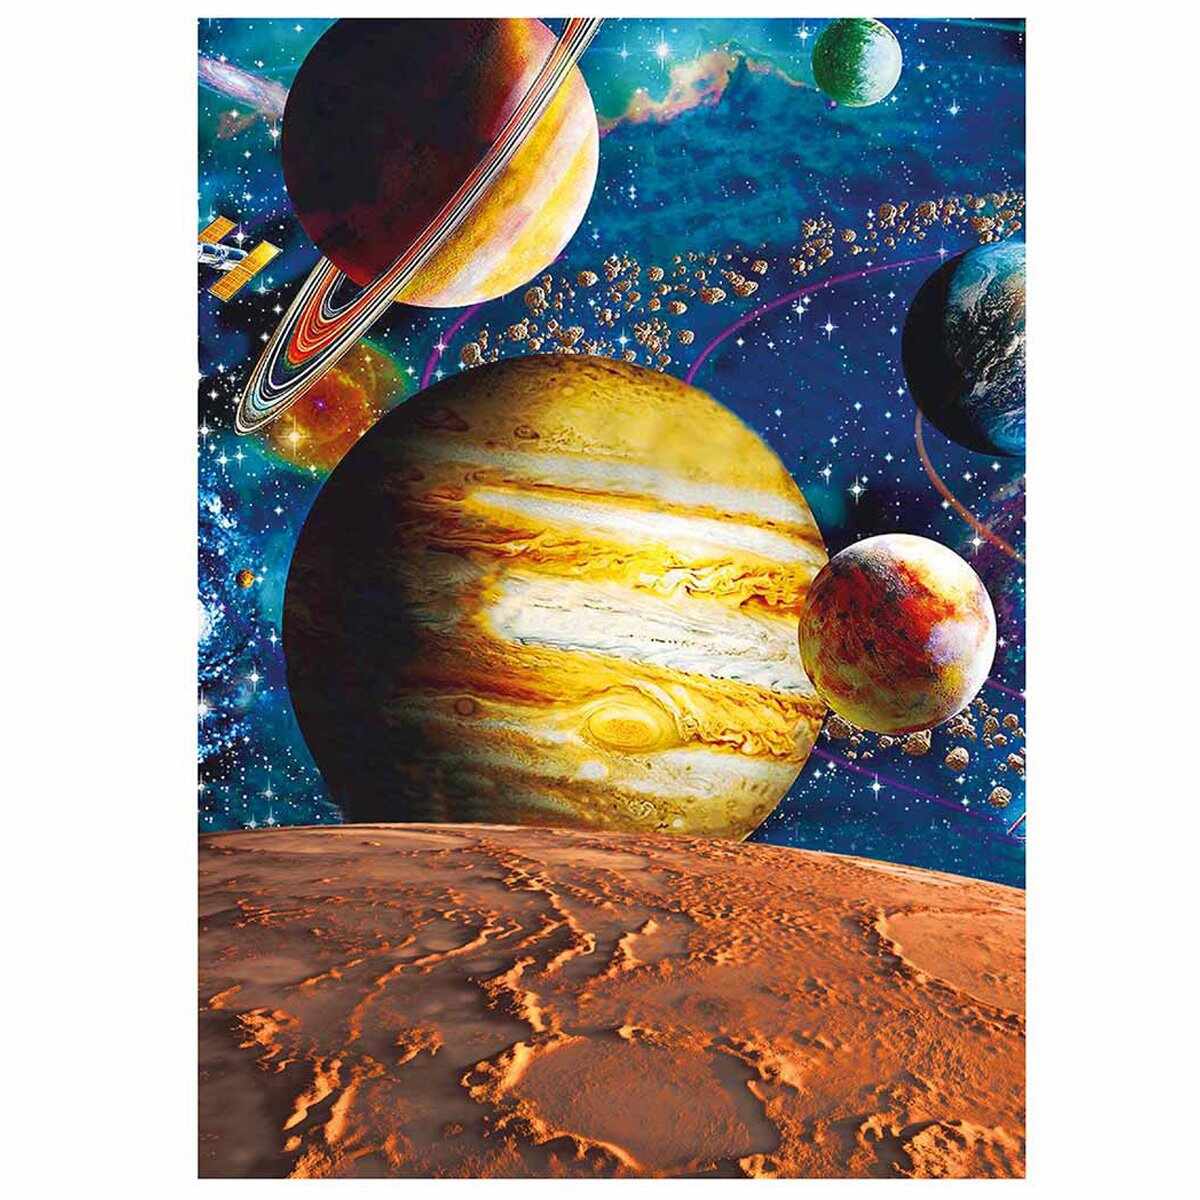 Puzzle Witty Puzzlezz, Galaxia, 100 piese